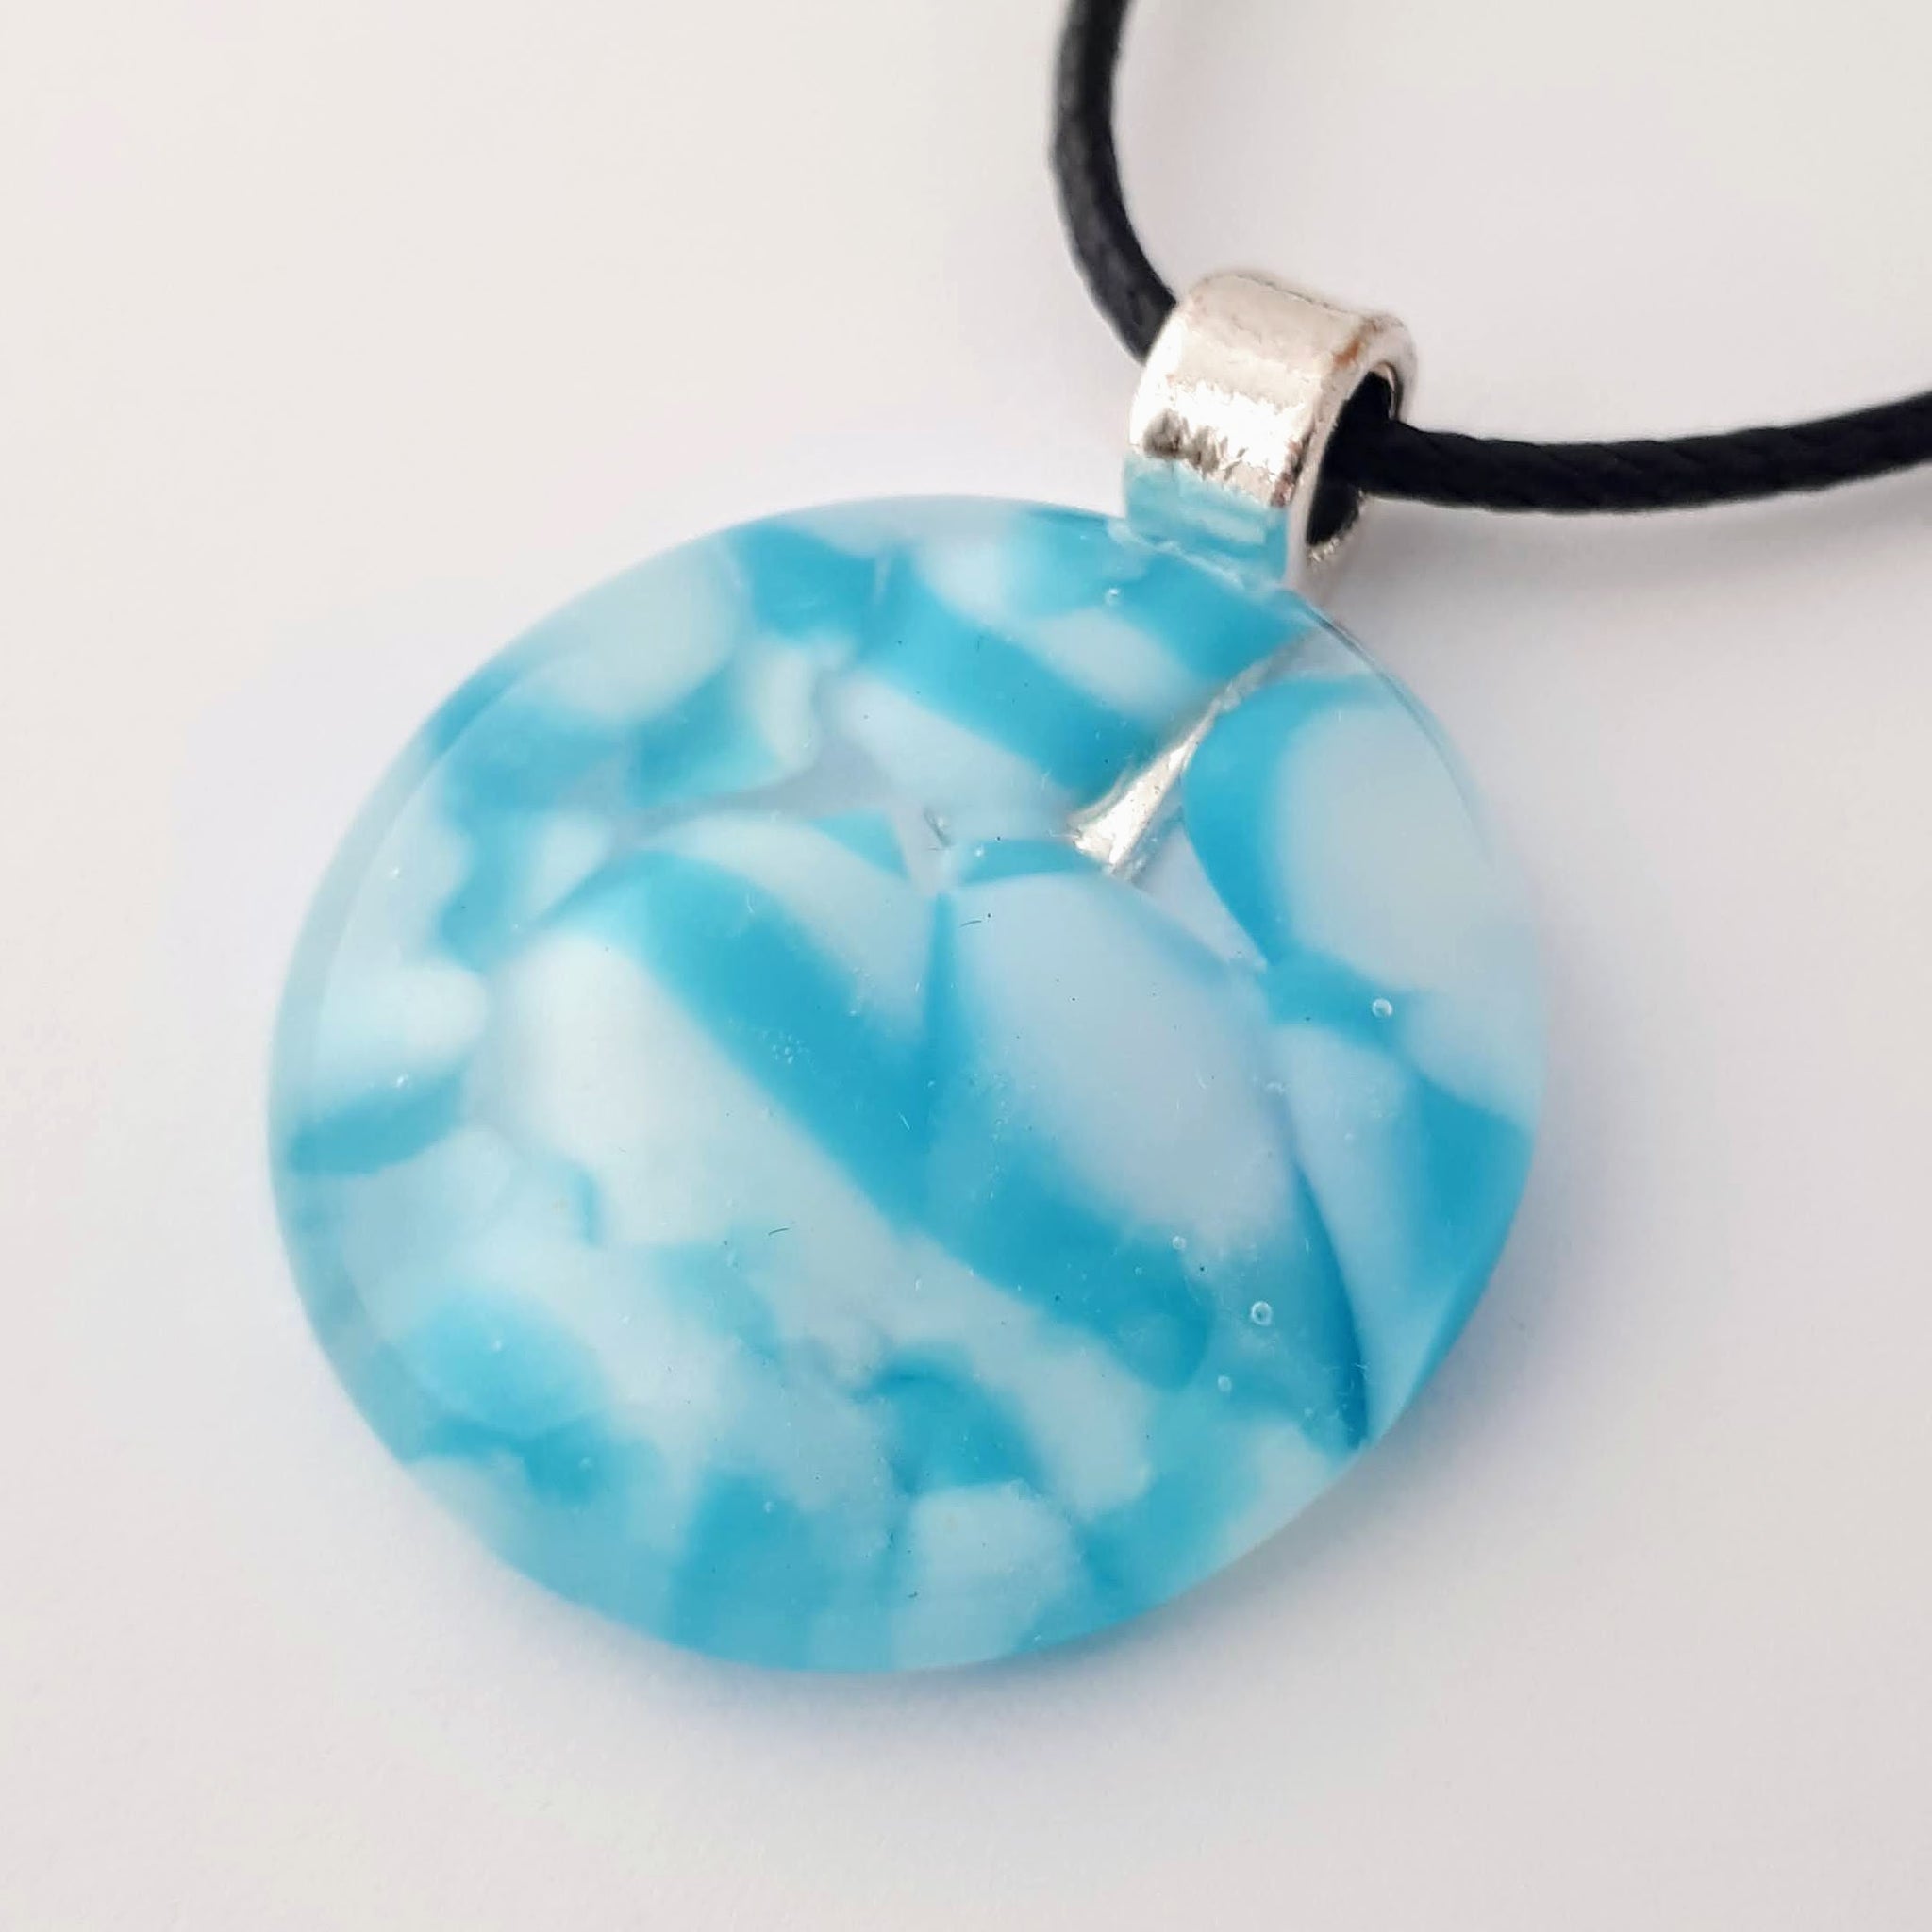 blue and white round glass fused pendant with silver coloured bail and black cord on white background